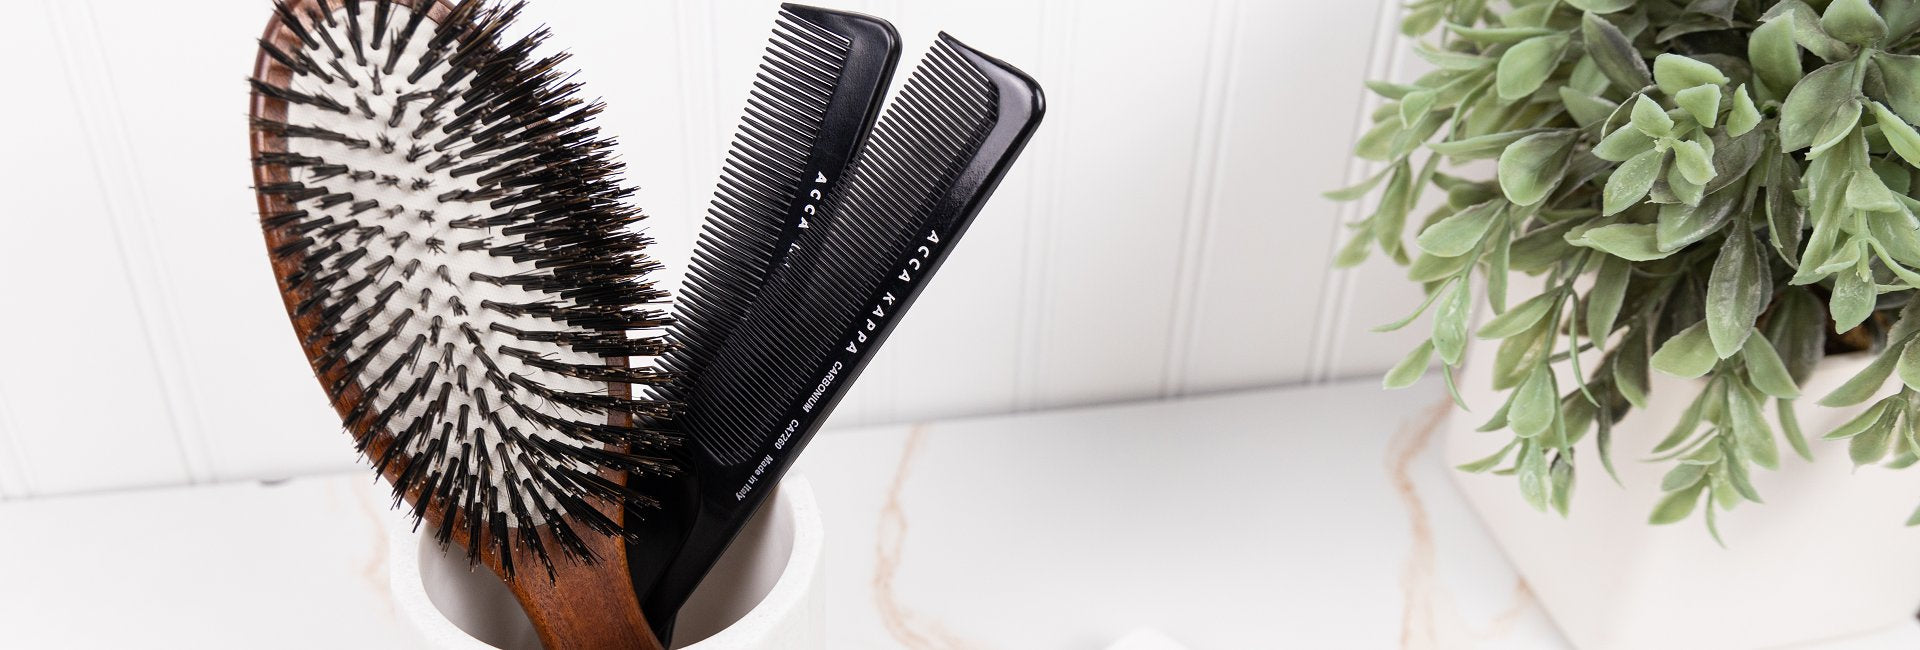 collections/brushes-and-combs-963x328-acca-kappa-collection-image.jpg